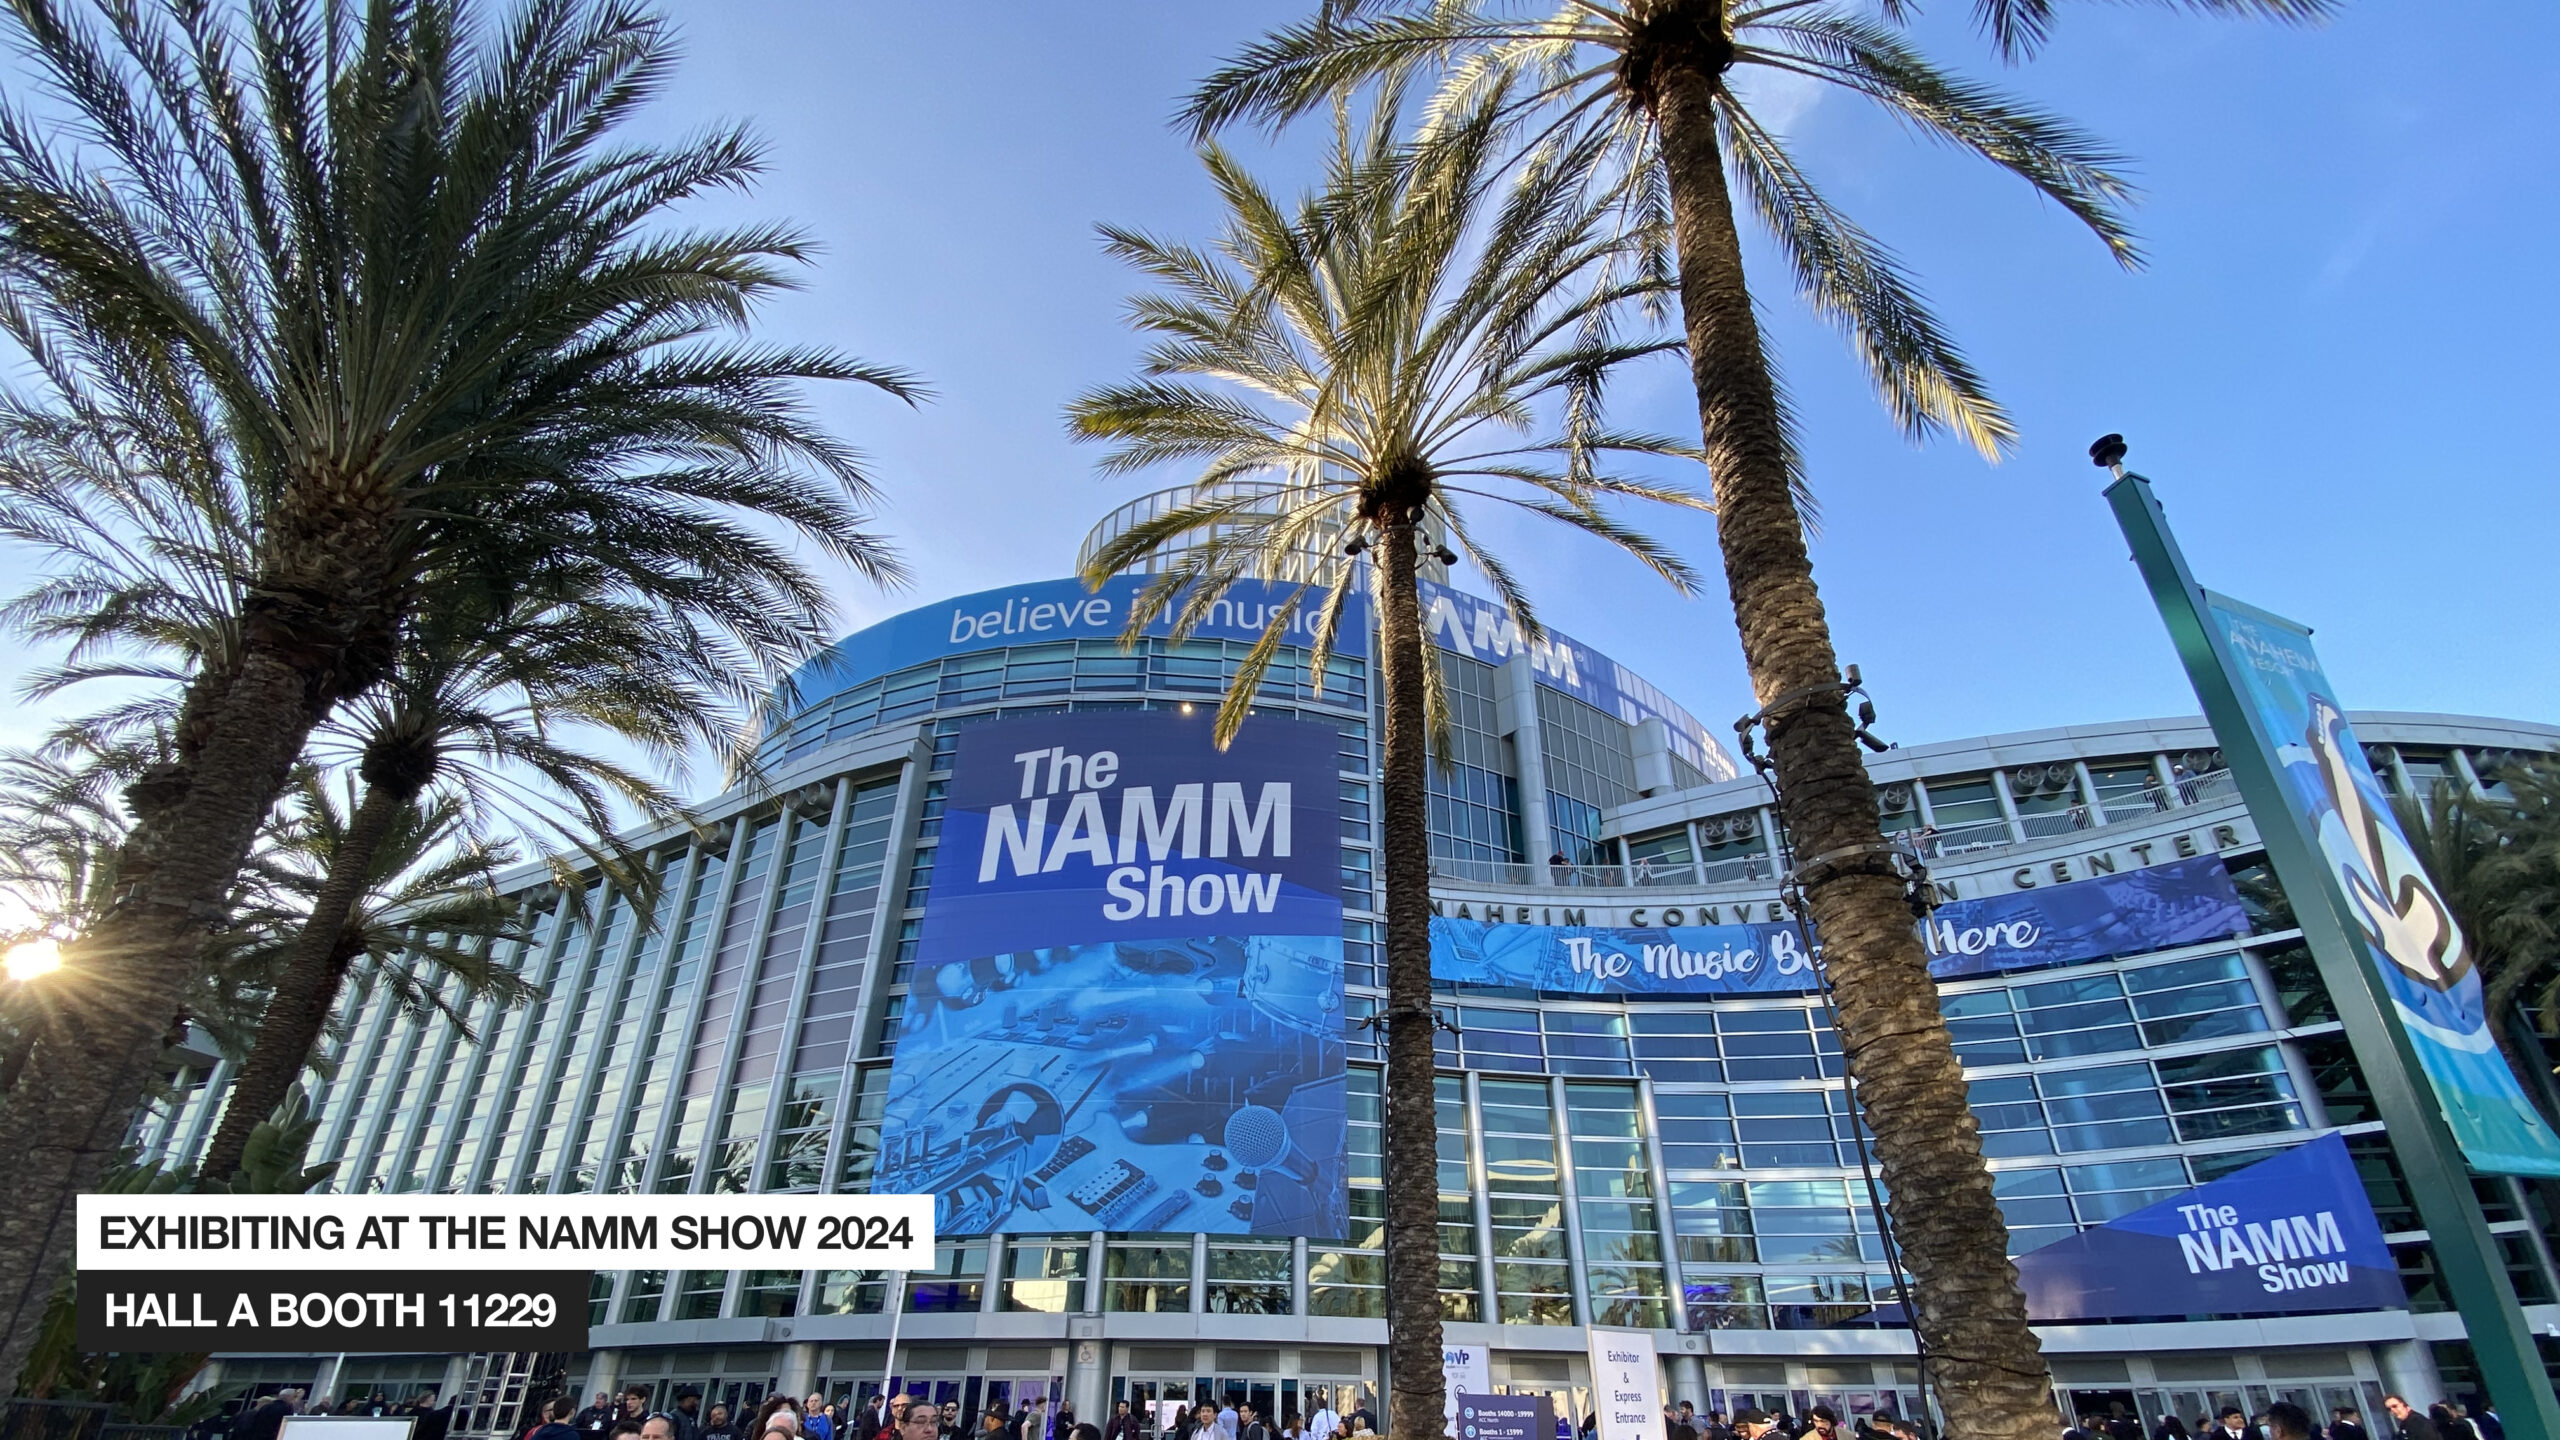 The Namm Show 2024